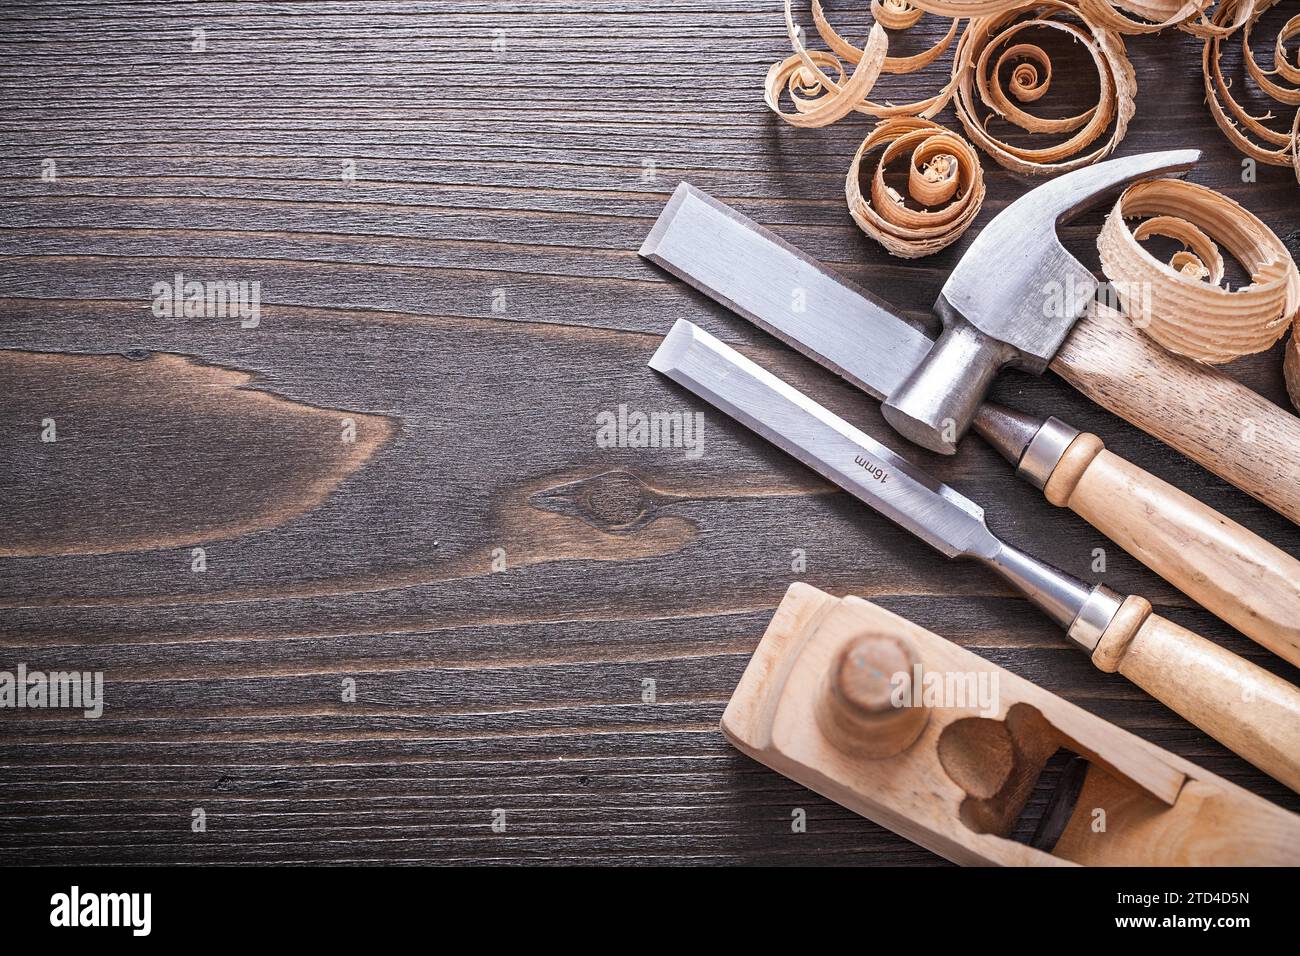 Planner claw hammer metal fixed chisel and wooden curled shavings on vintage wooden board building concept Stock Photo